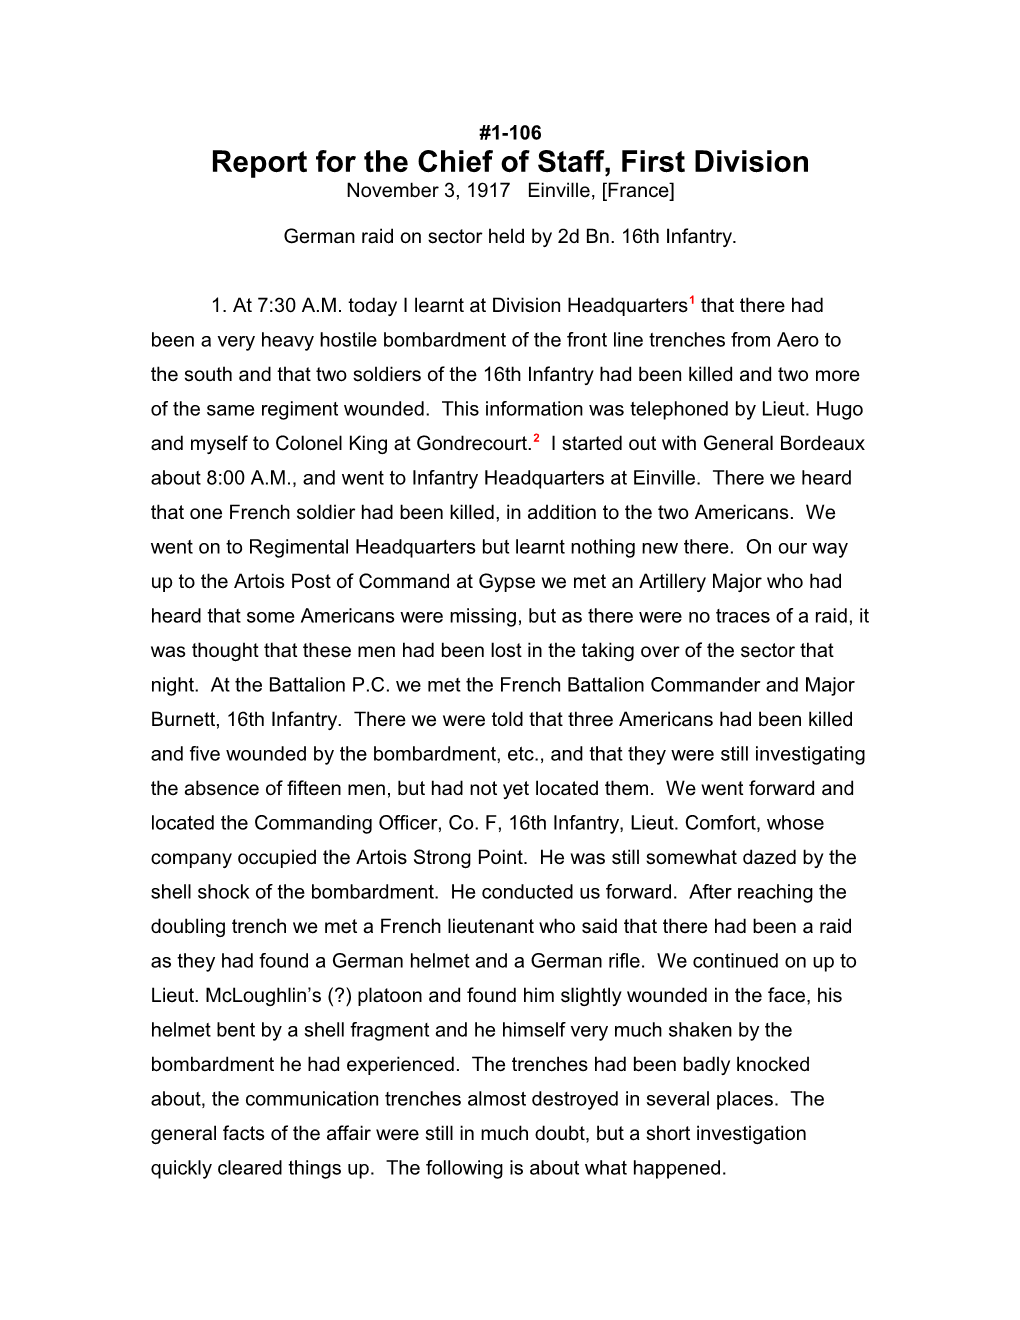 Report for the Chief of Staff, First Division